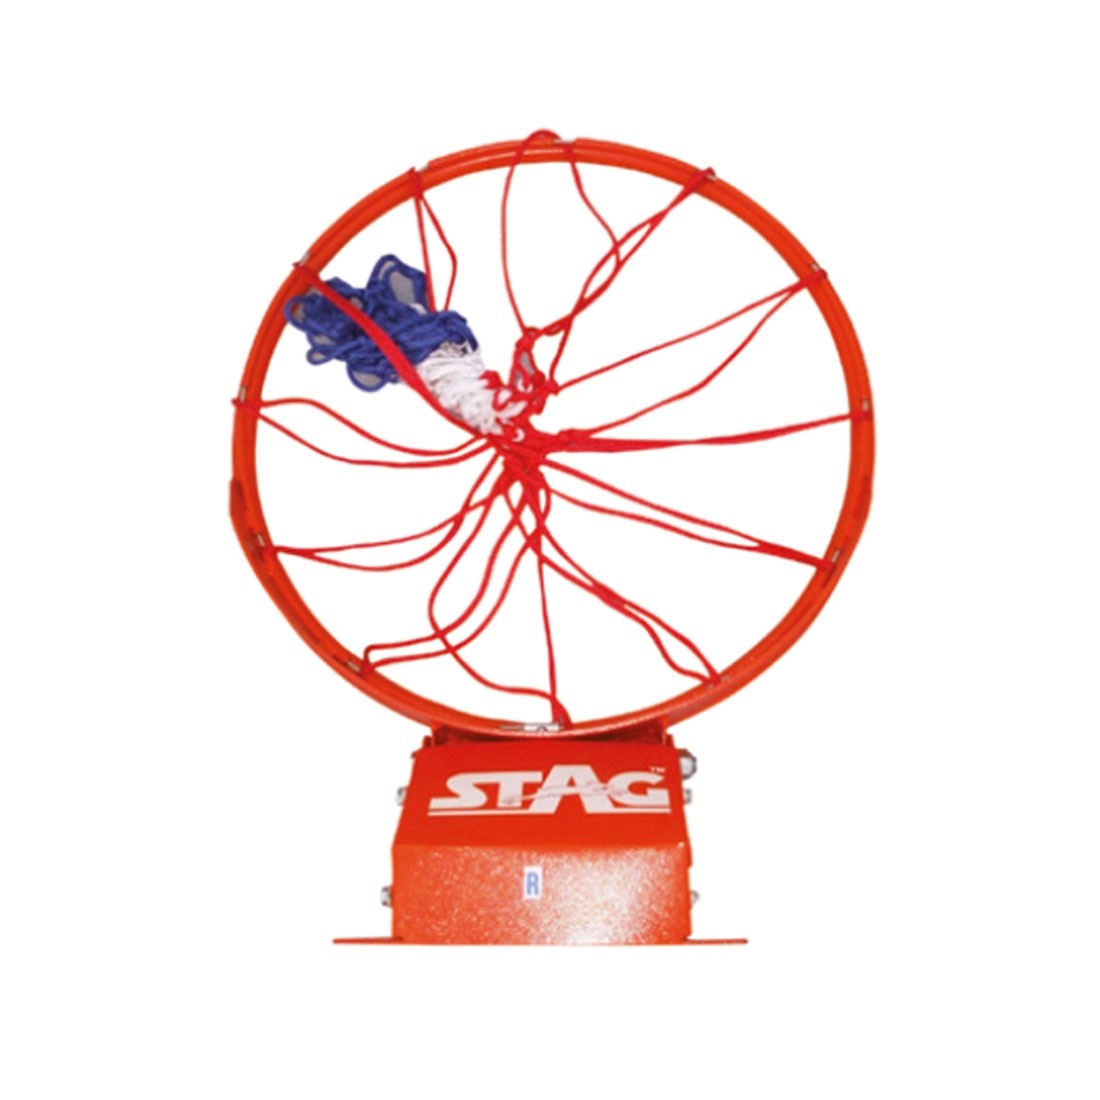 BASKETBALL RING WITH 3 SPRINGS WITH NET